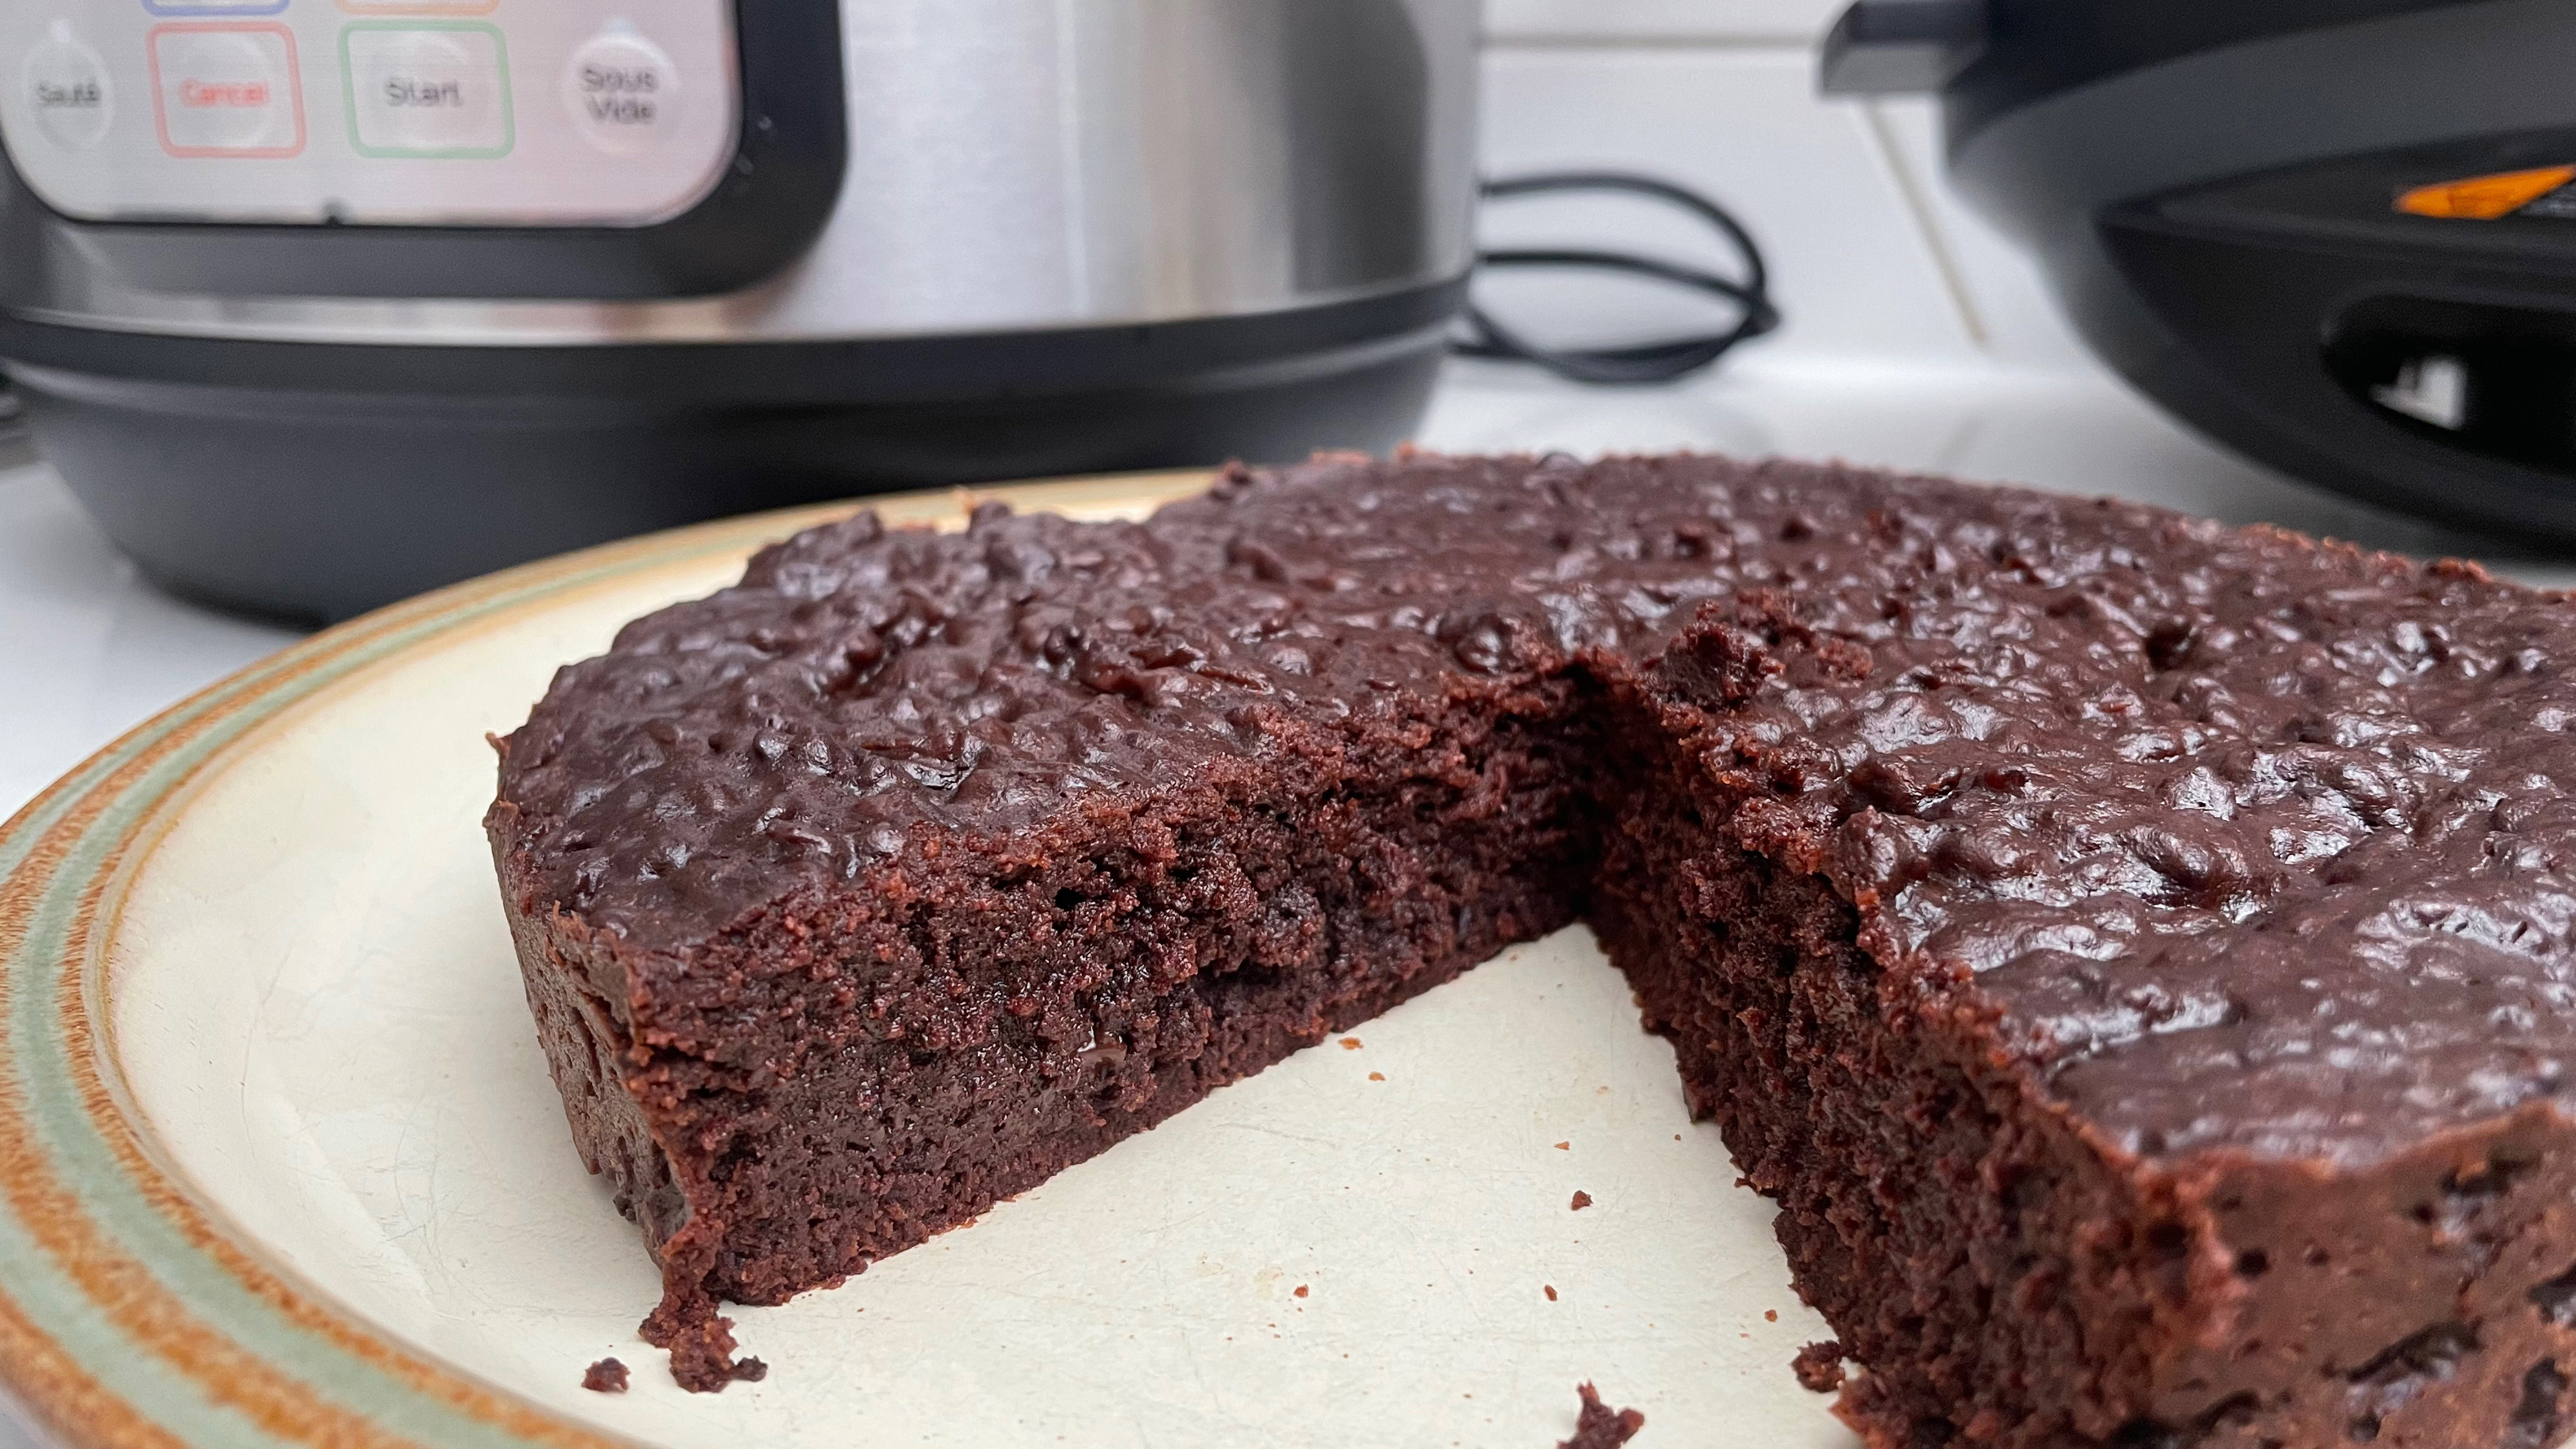 A fudgy chocolate cake baked in an Instant Pot